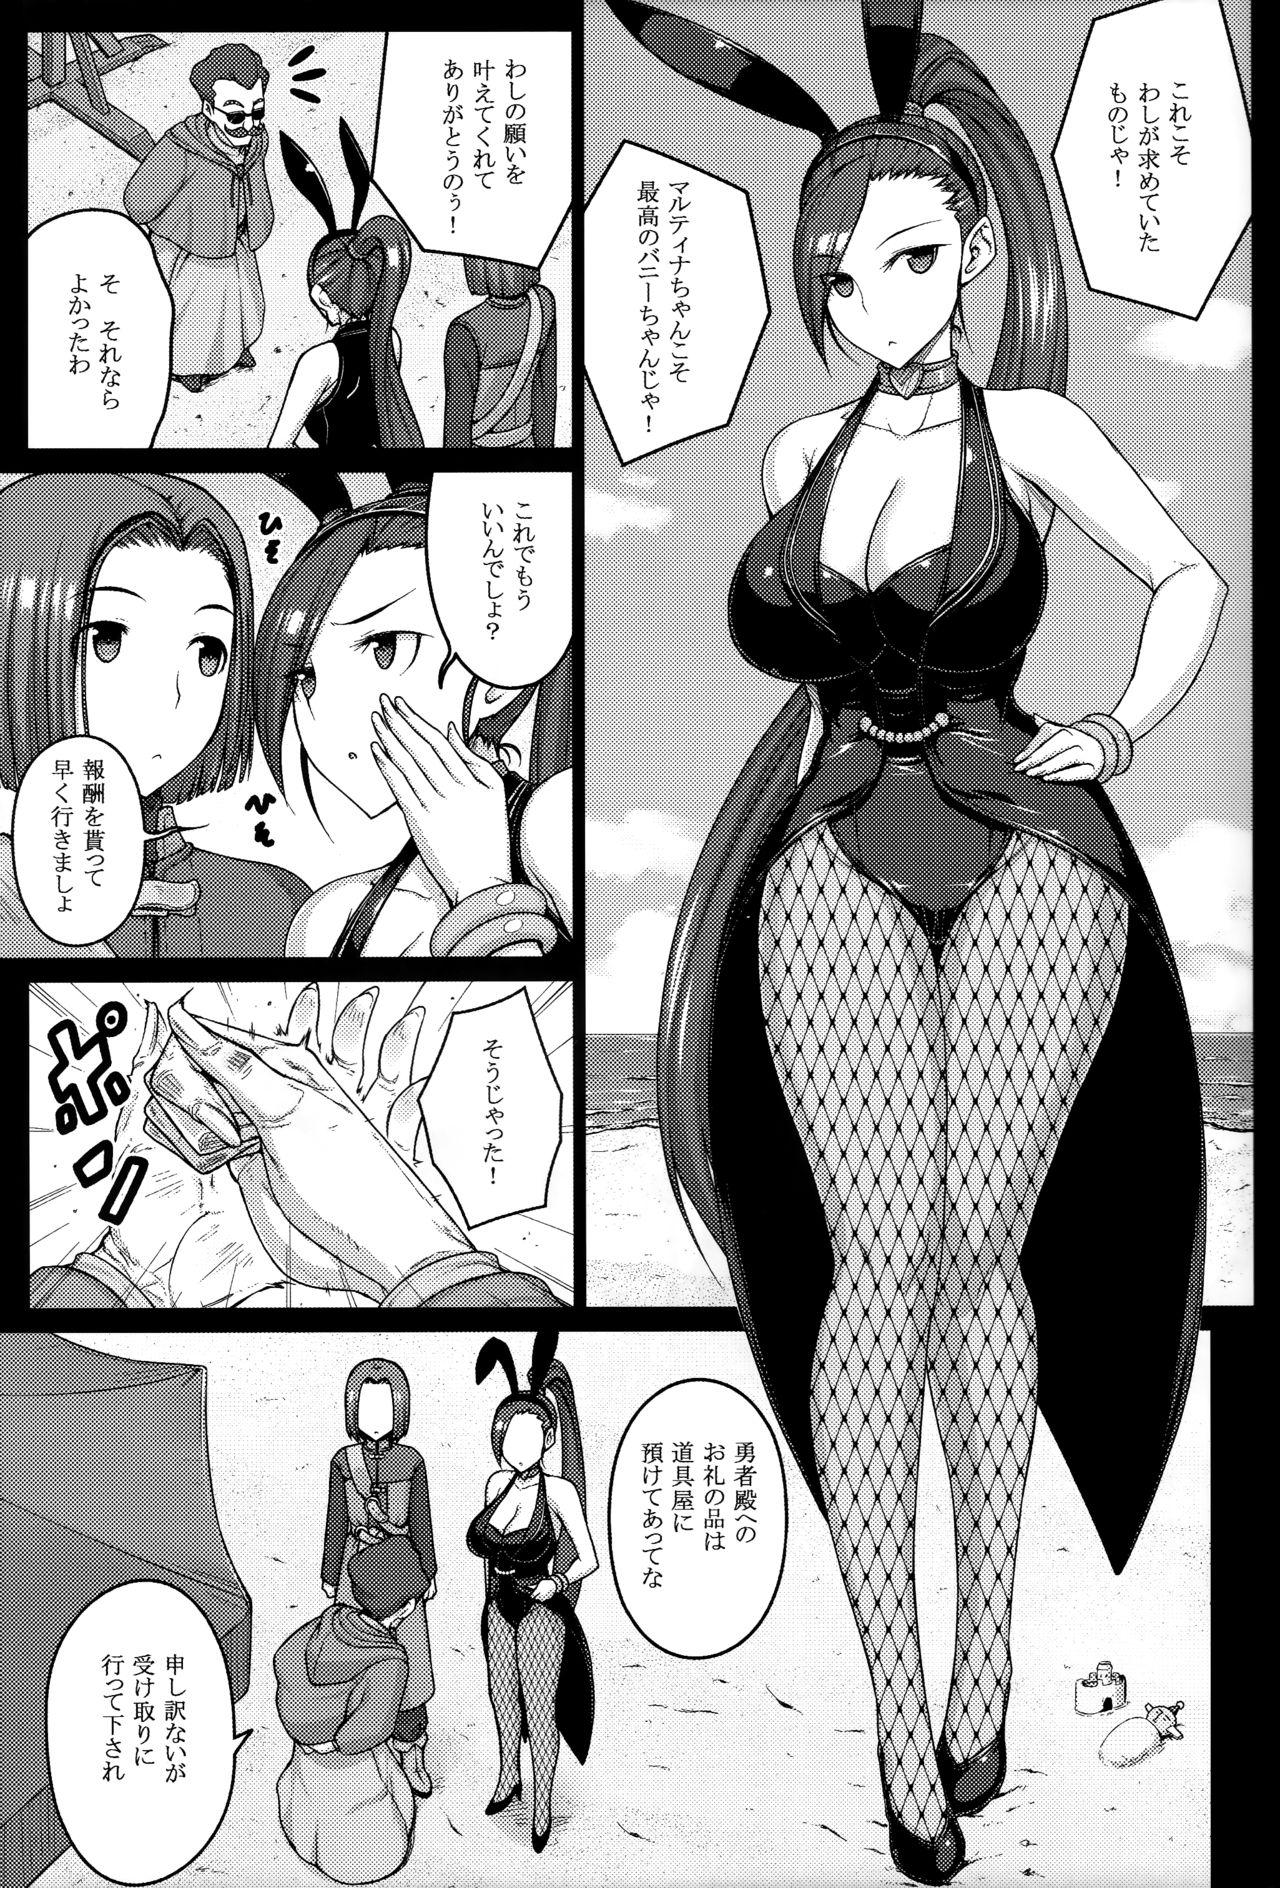 Cheating AWESOME - Dragon quest xi Asian Babes - Page 4